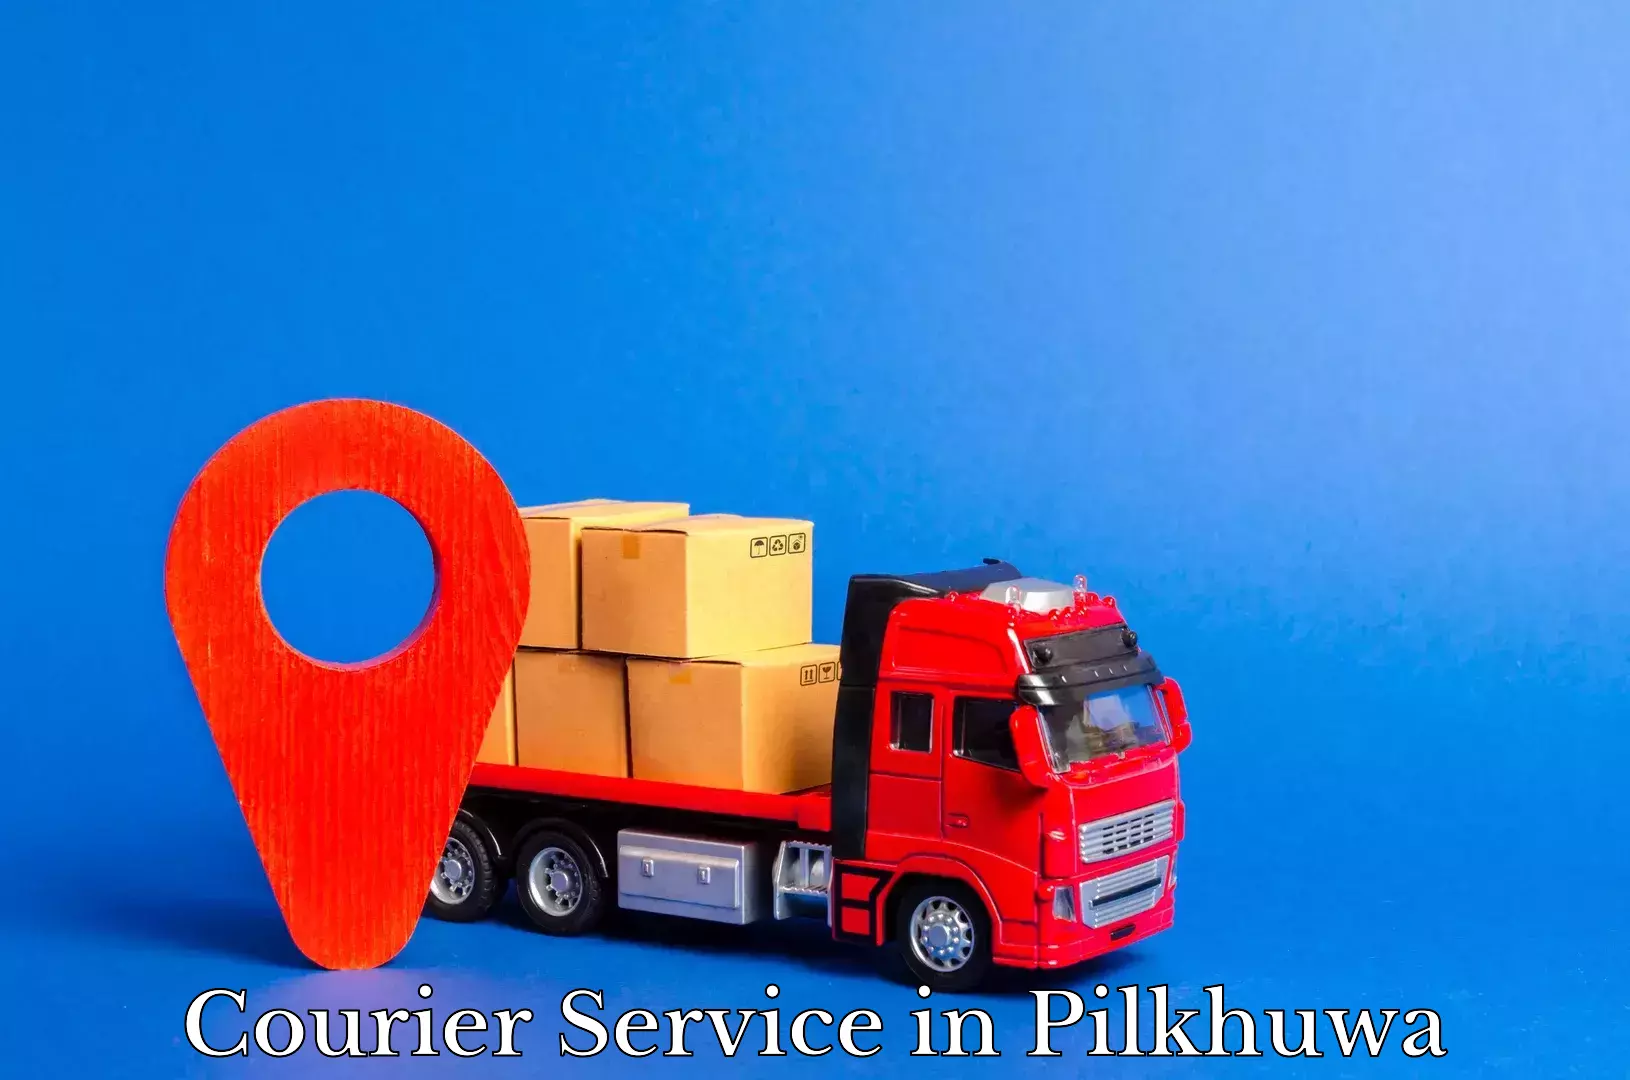 Customer-oriented courier services in Pilkhuwa